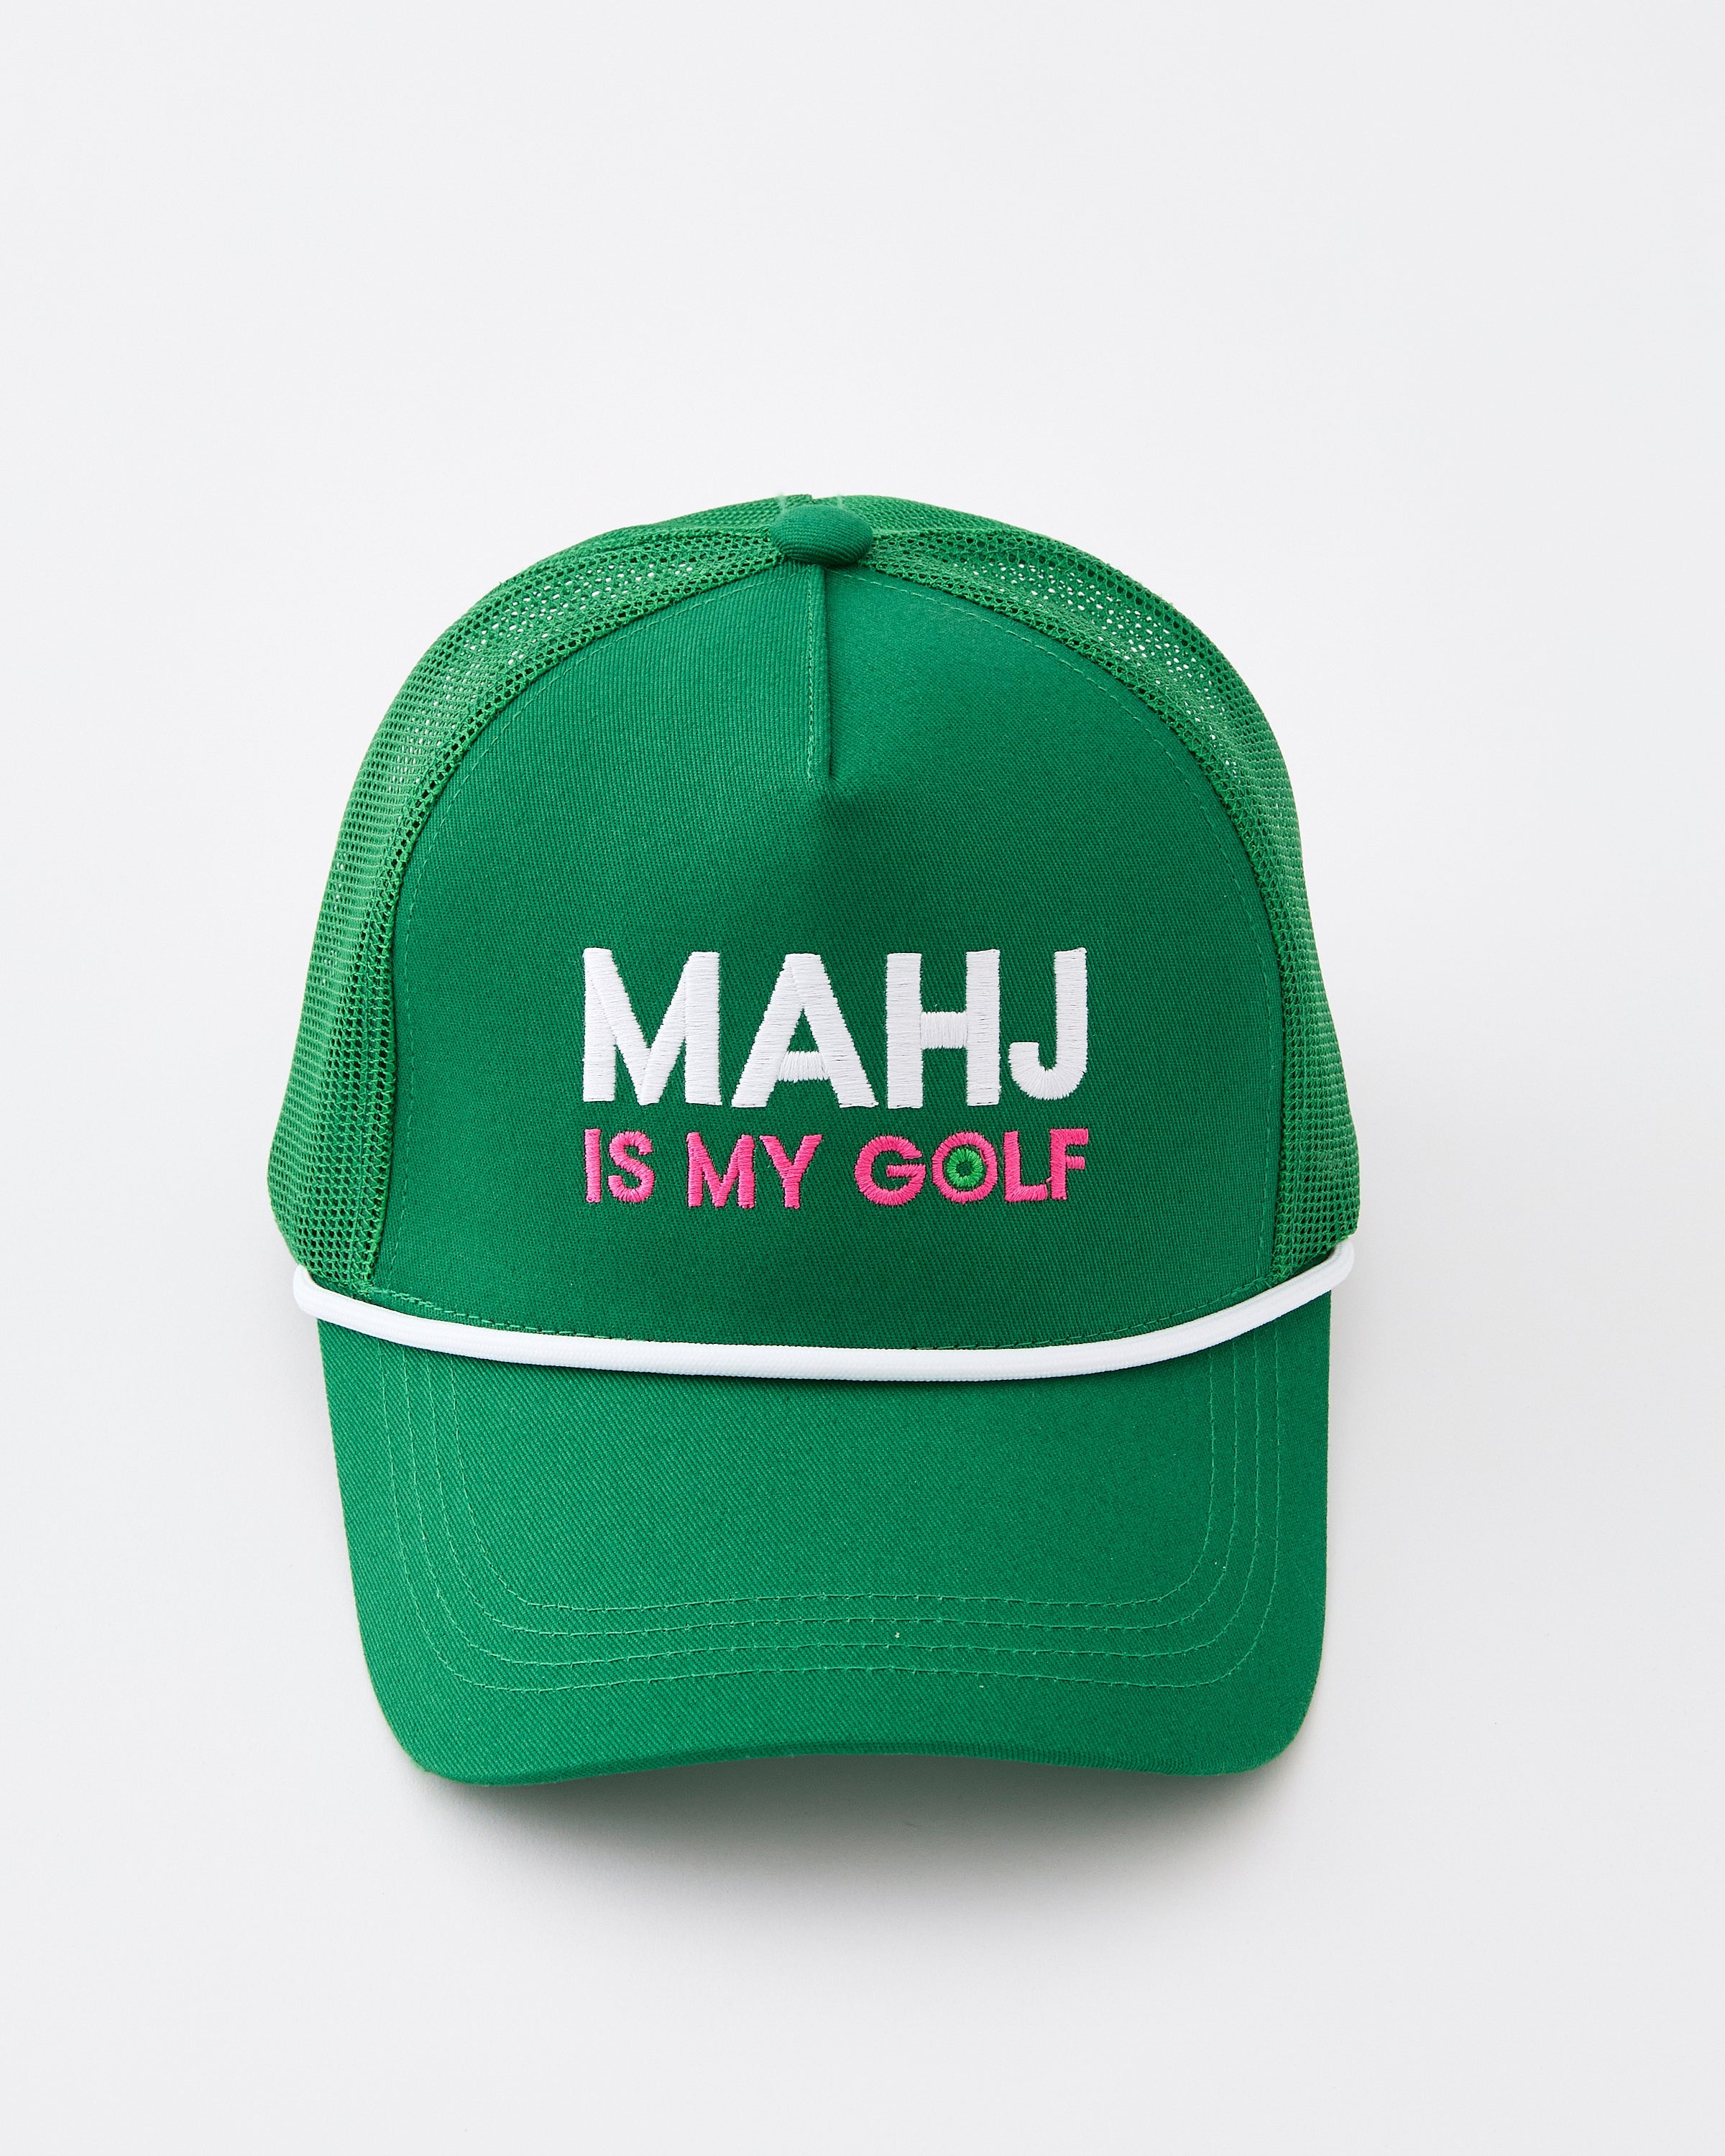 Accessories – Oh My Mahjong